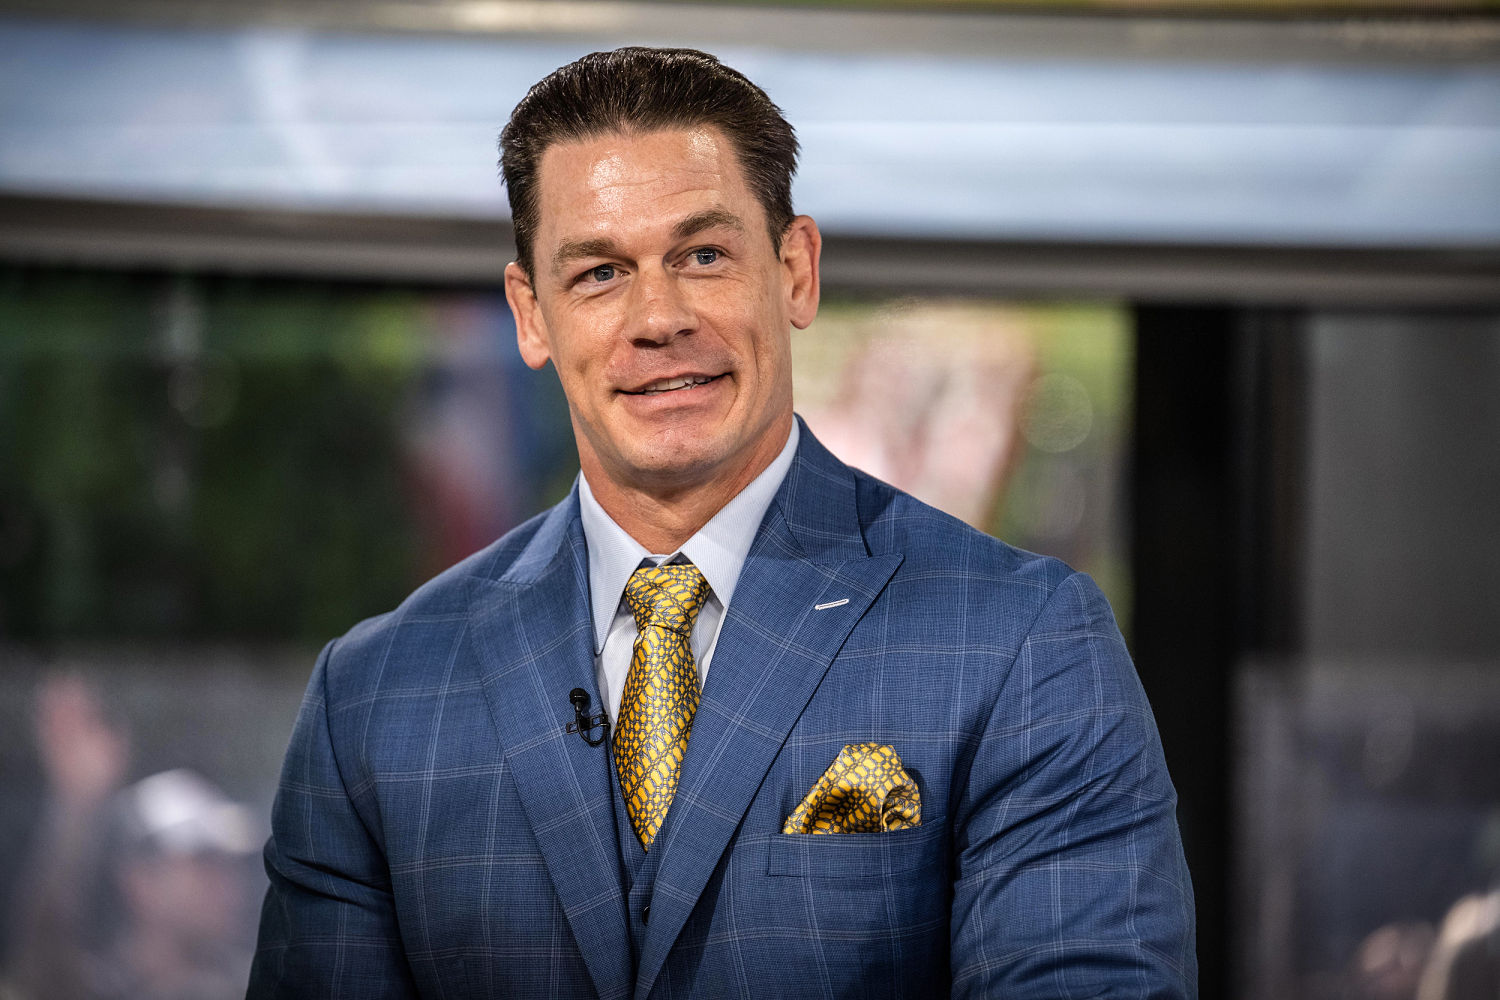 John Cena says he used to stand up for his gay older brother growing up